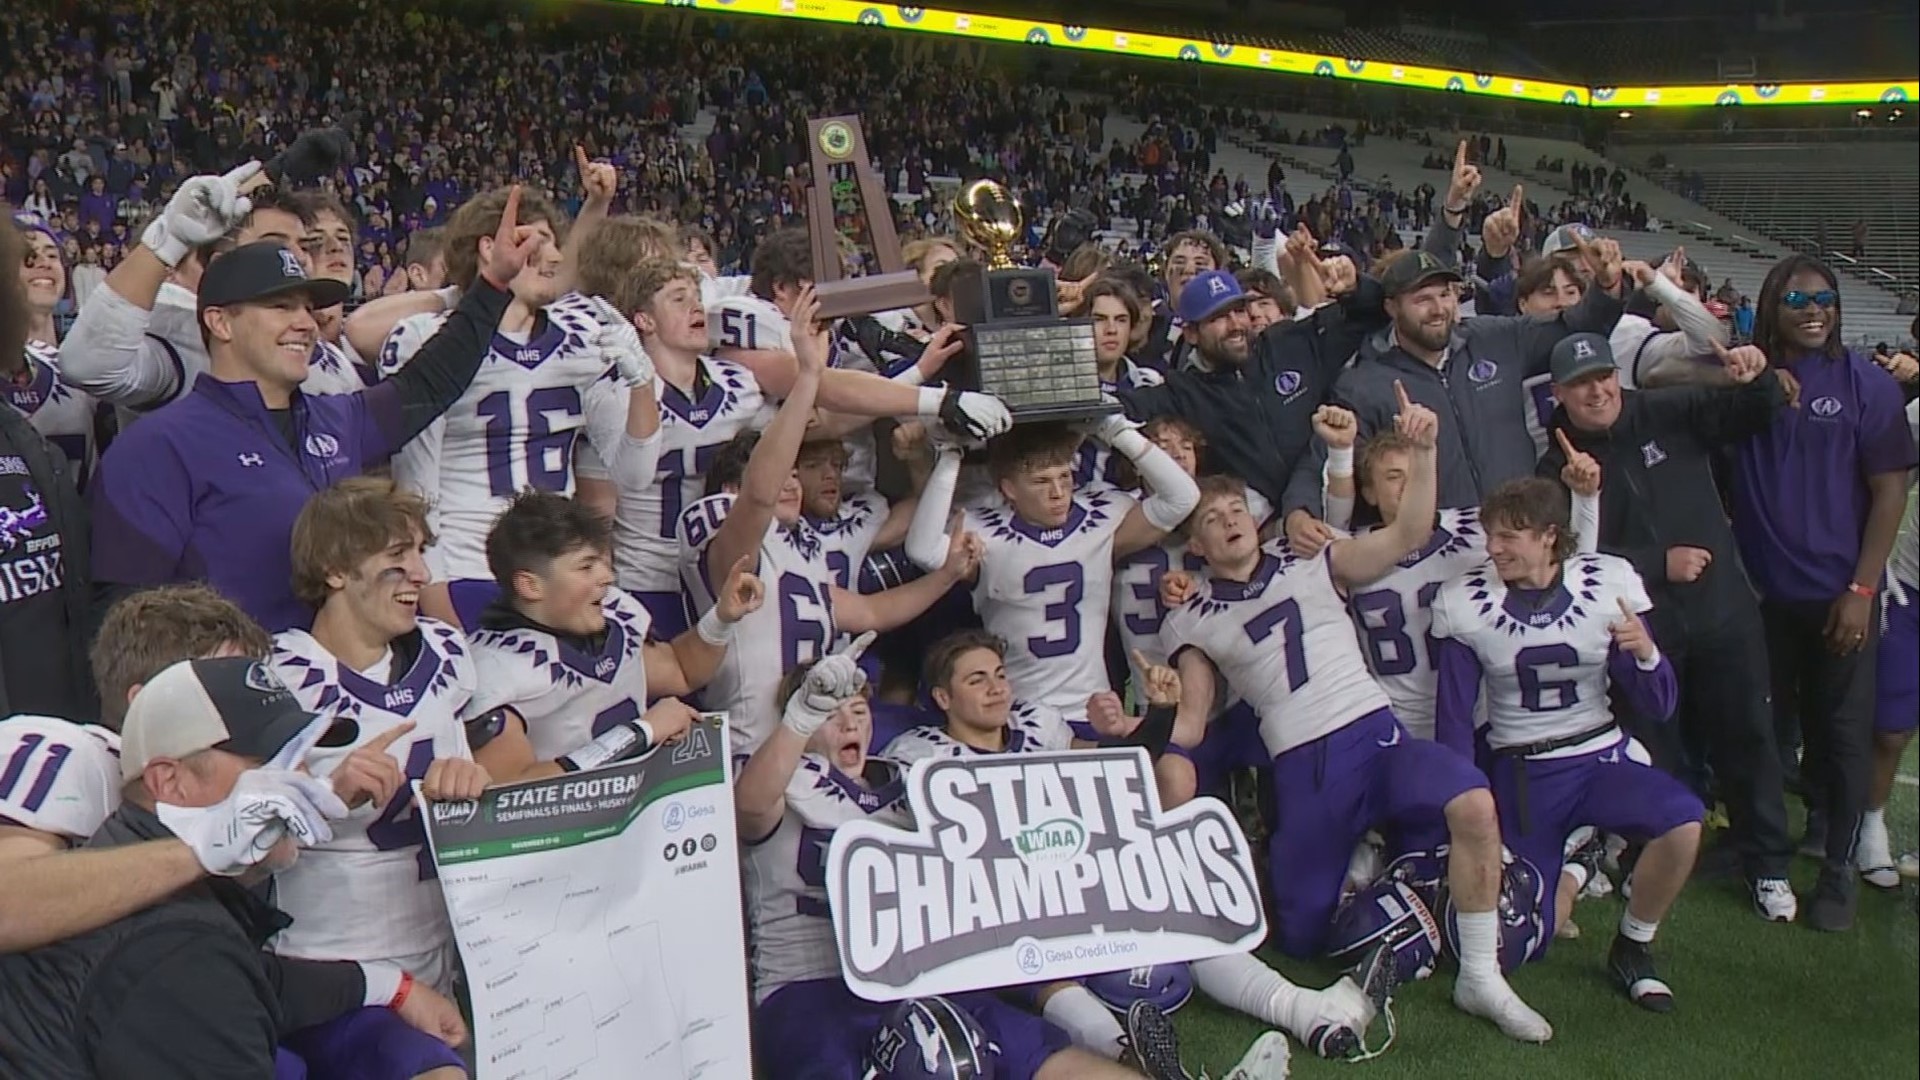 Anacortes defeated Tumwater for the 2A State High School Football Title, 60-30.  It's the first football state title in Anacortes high school's history.